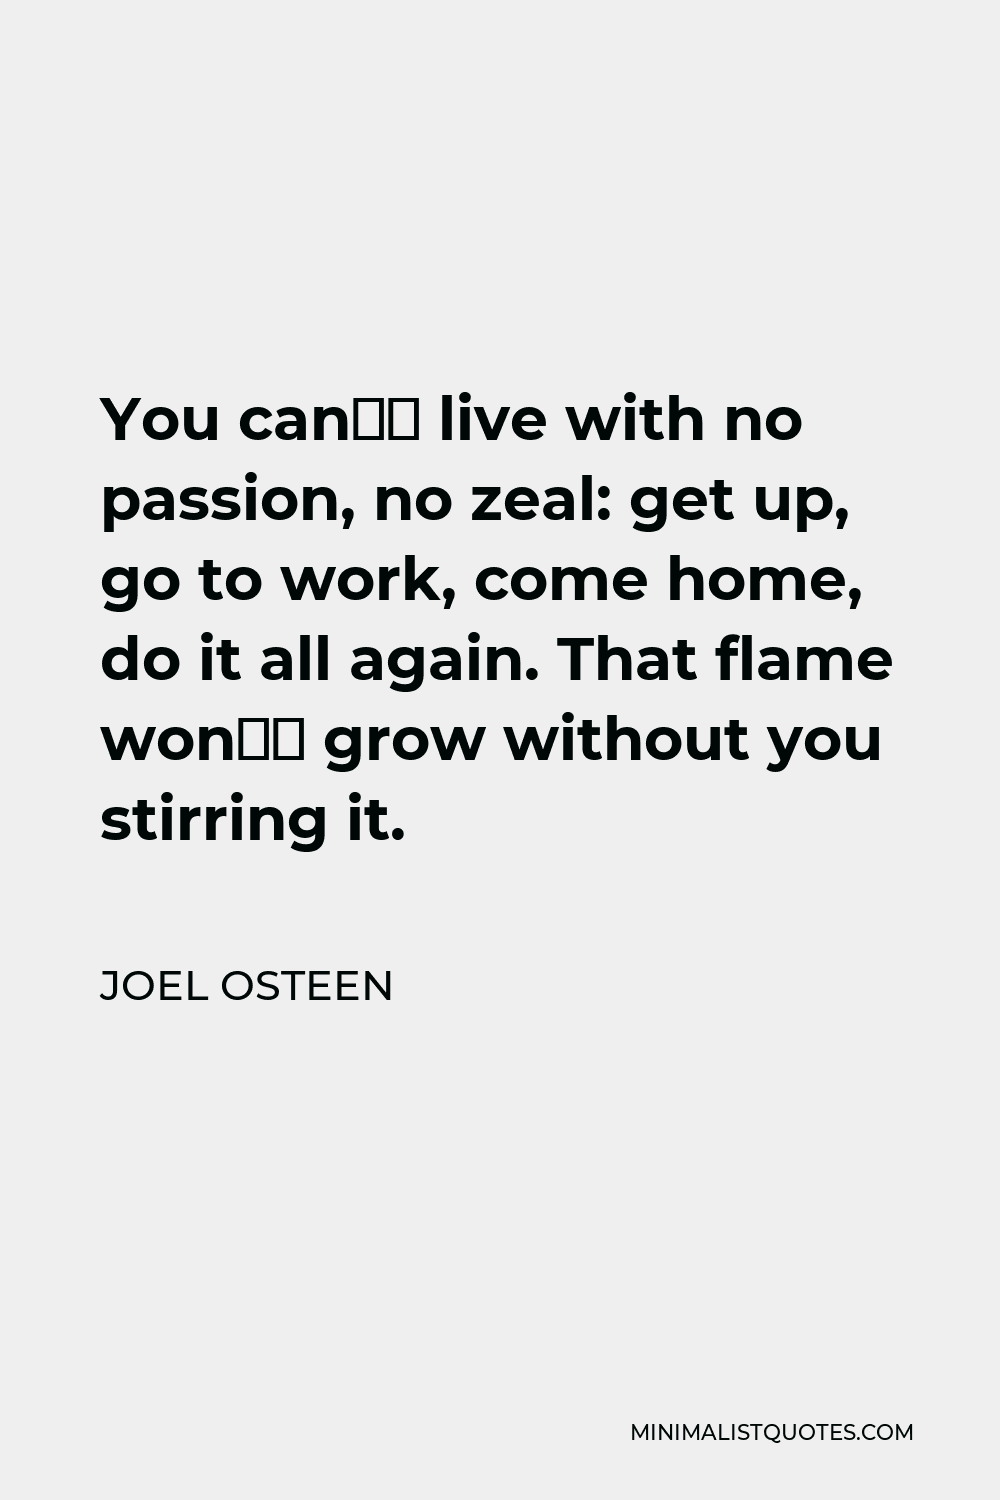 Joel Osteen Quote - You can’t live with no passion, no zeal: get up, go to work, come home, do it all again. That flame won’t grow without you stirring it.